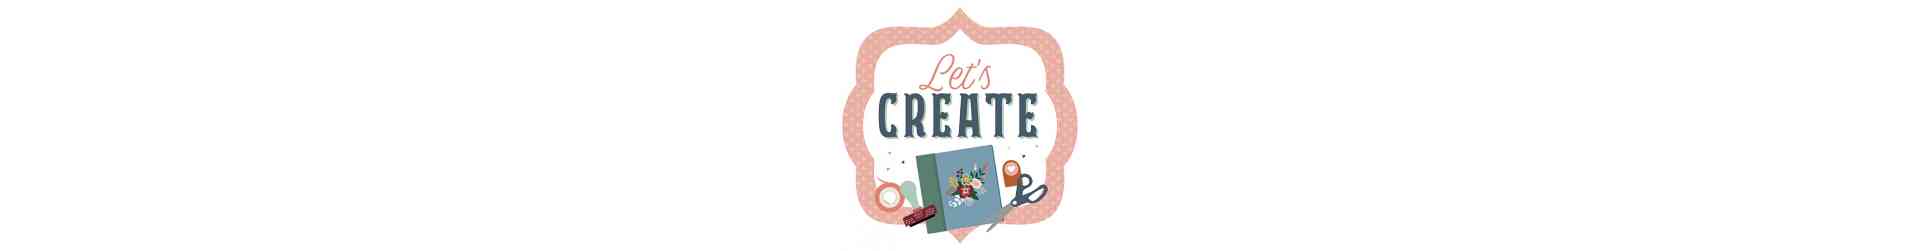 Let's Create